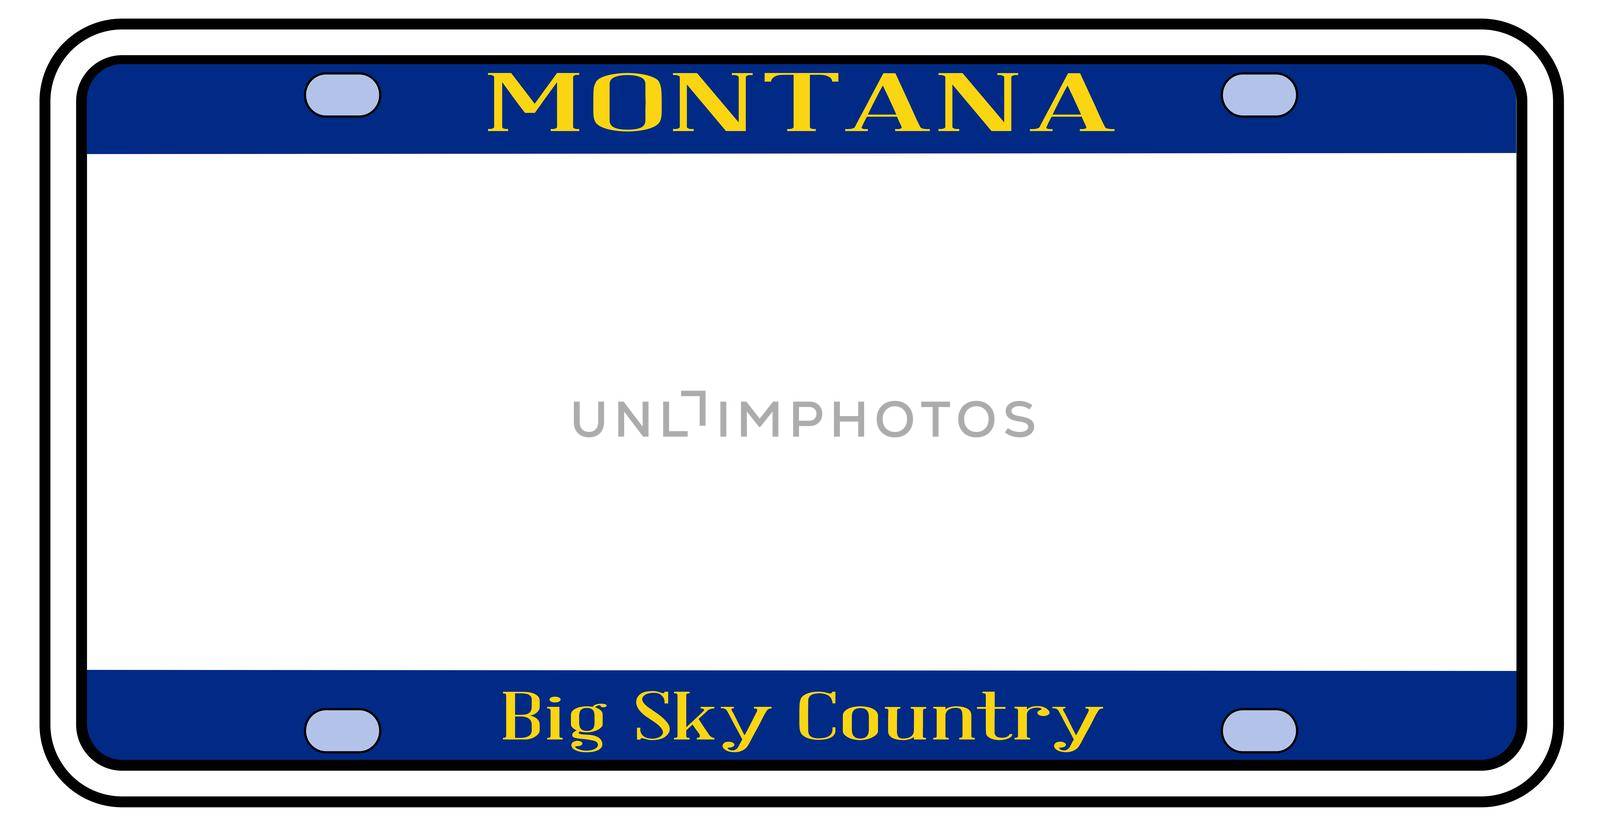 Blank Montana state license plate in the colors of the state flag over a white background